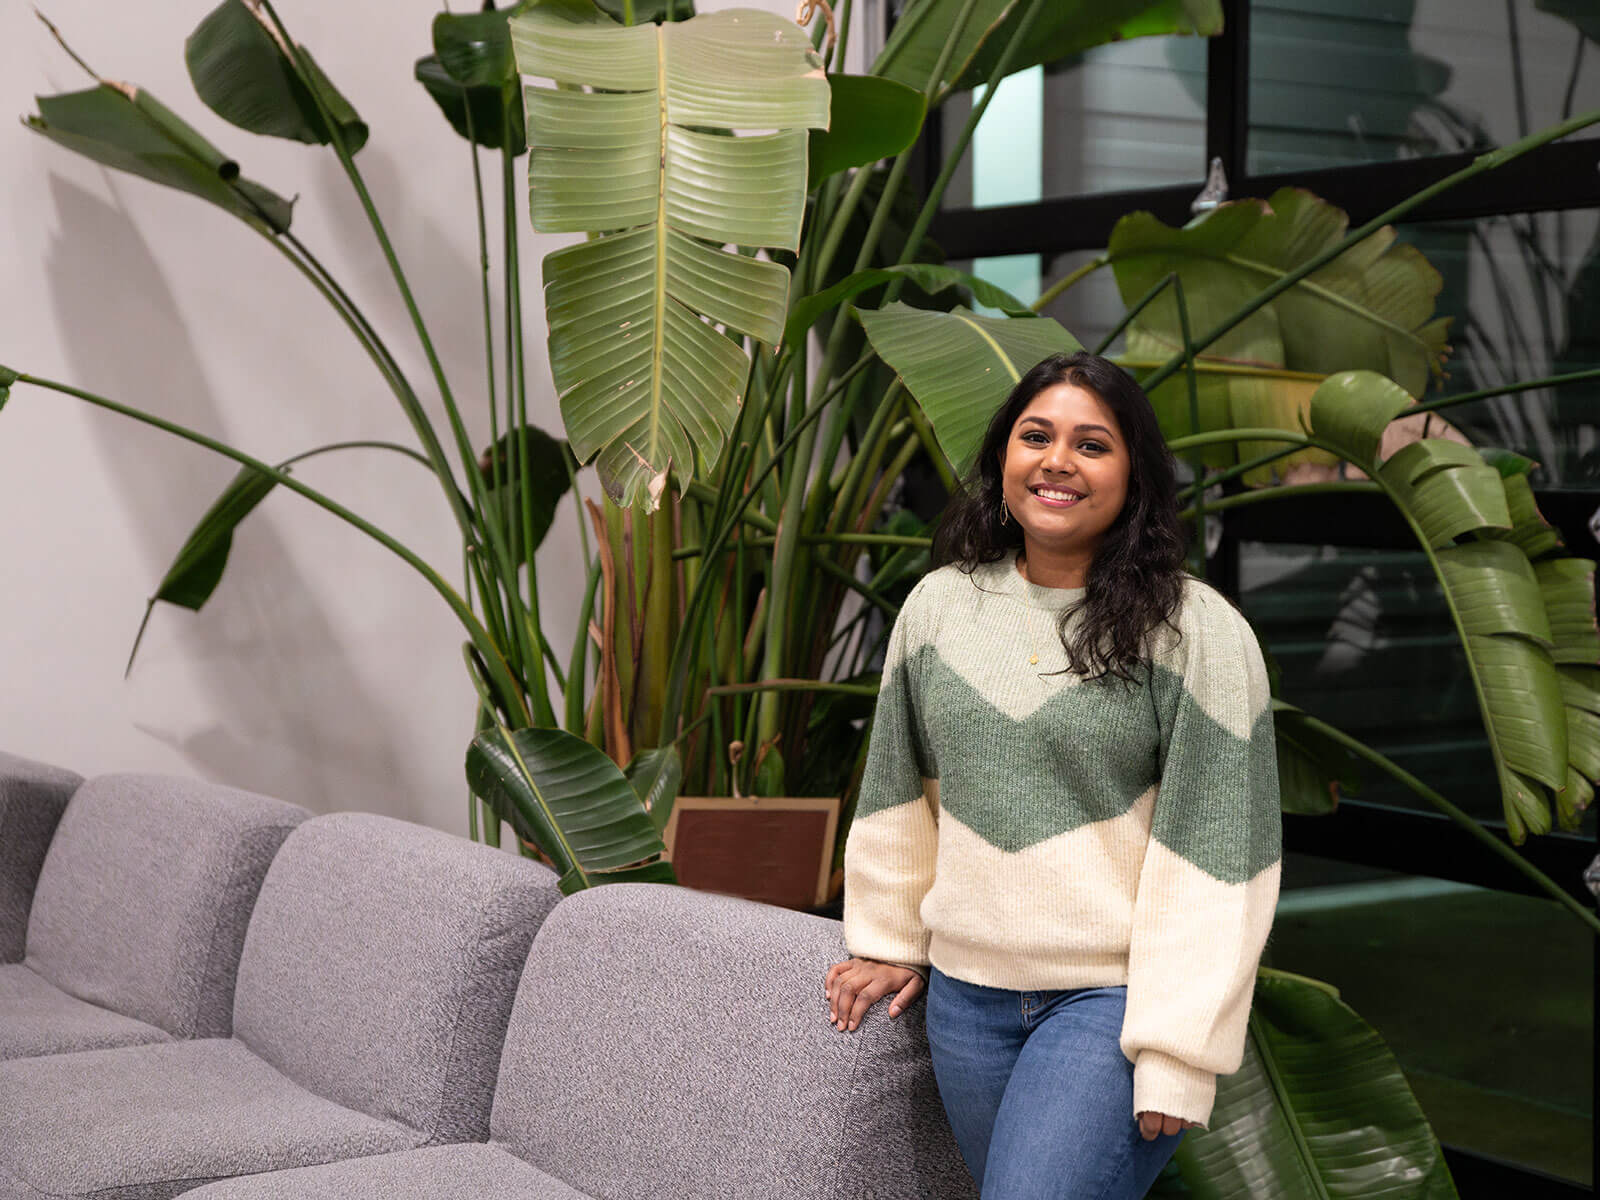 DigiPen graduate Neha Chintala smiles standing next to a couch and some large, leafy plants.